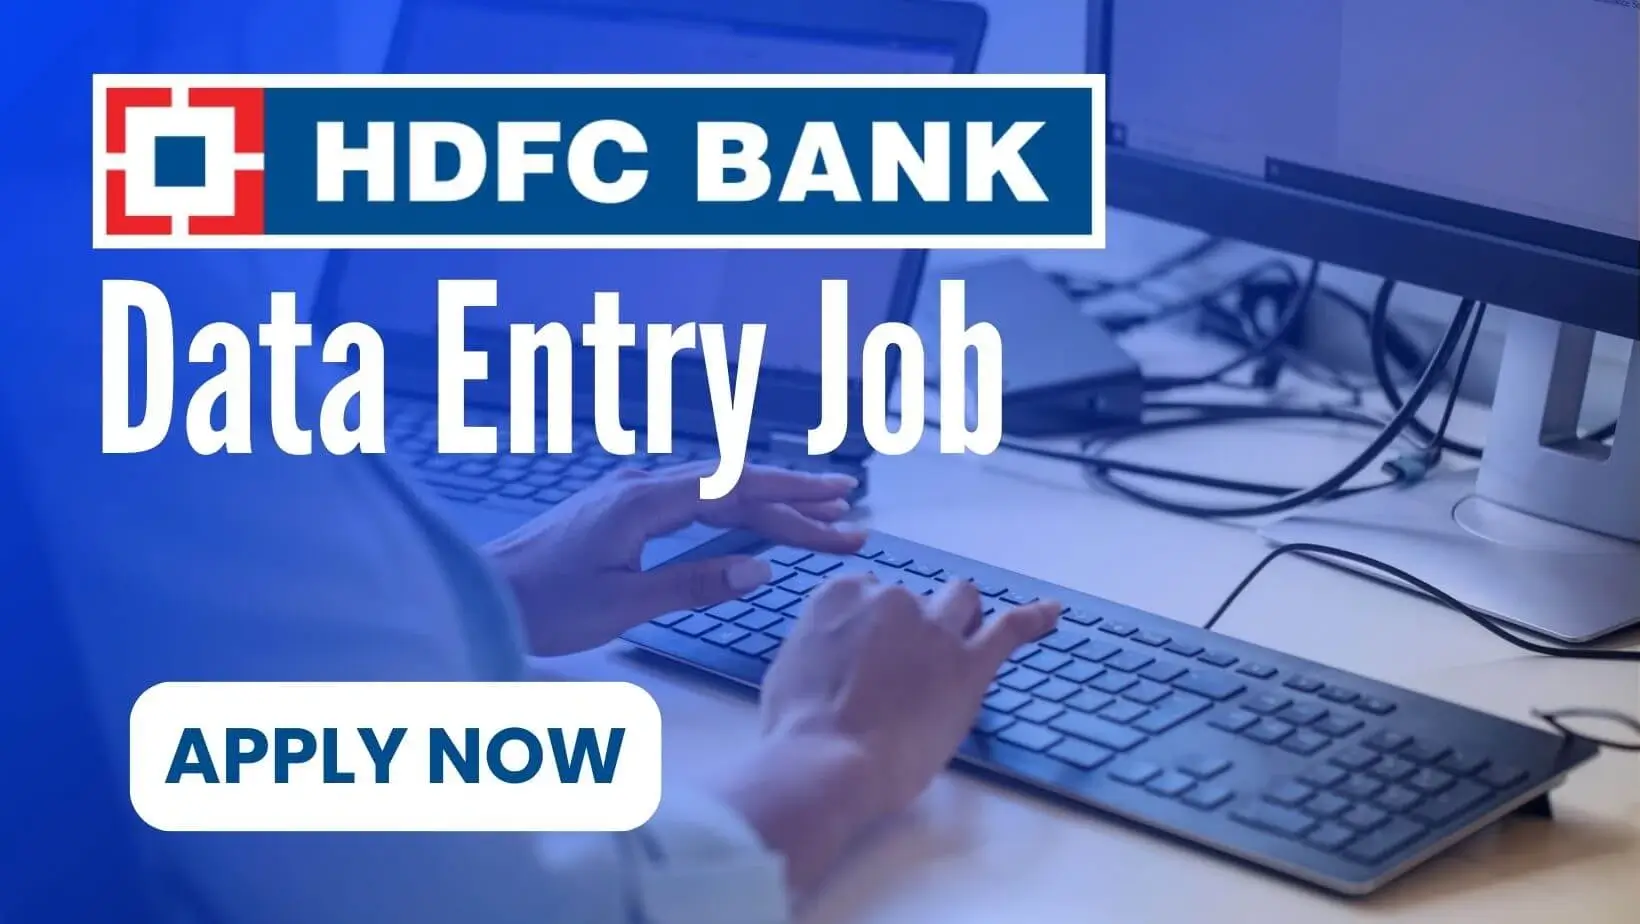 HDFC Bank Job Apply for the Data Entry role by Smart Market Private Limited. No experience required, just a 12th-grade qualification. Enjoy benefits like PF, ESI, medical, and incentives. 16 openings nationwide. Apply by 27/02/2024. Submit your CV to HR JET at 8250568887 for a chance to join the finance sector.